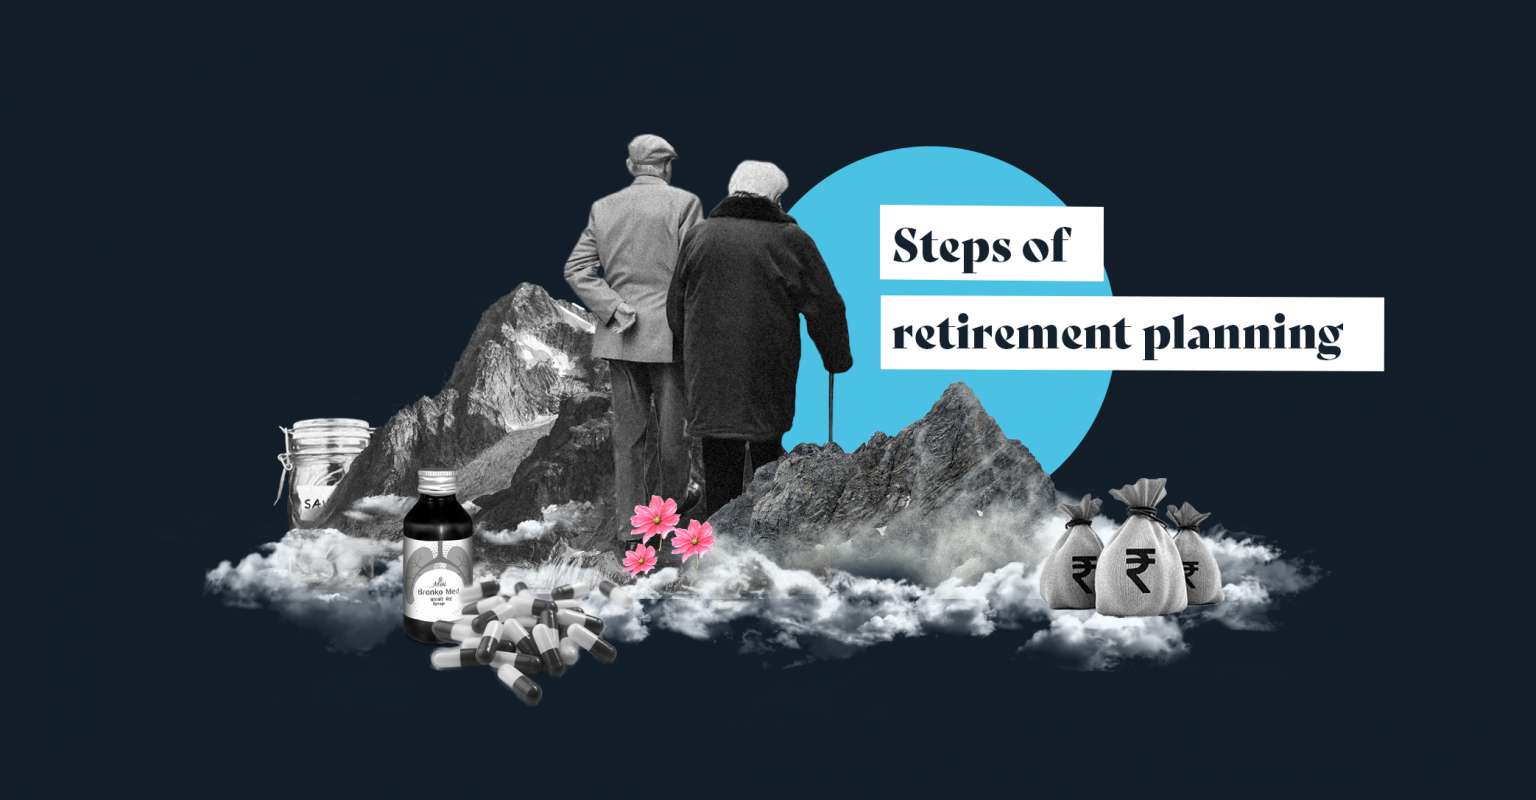 Retirement planning: meaning, importance, and steps - Blog by Tickertape